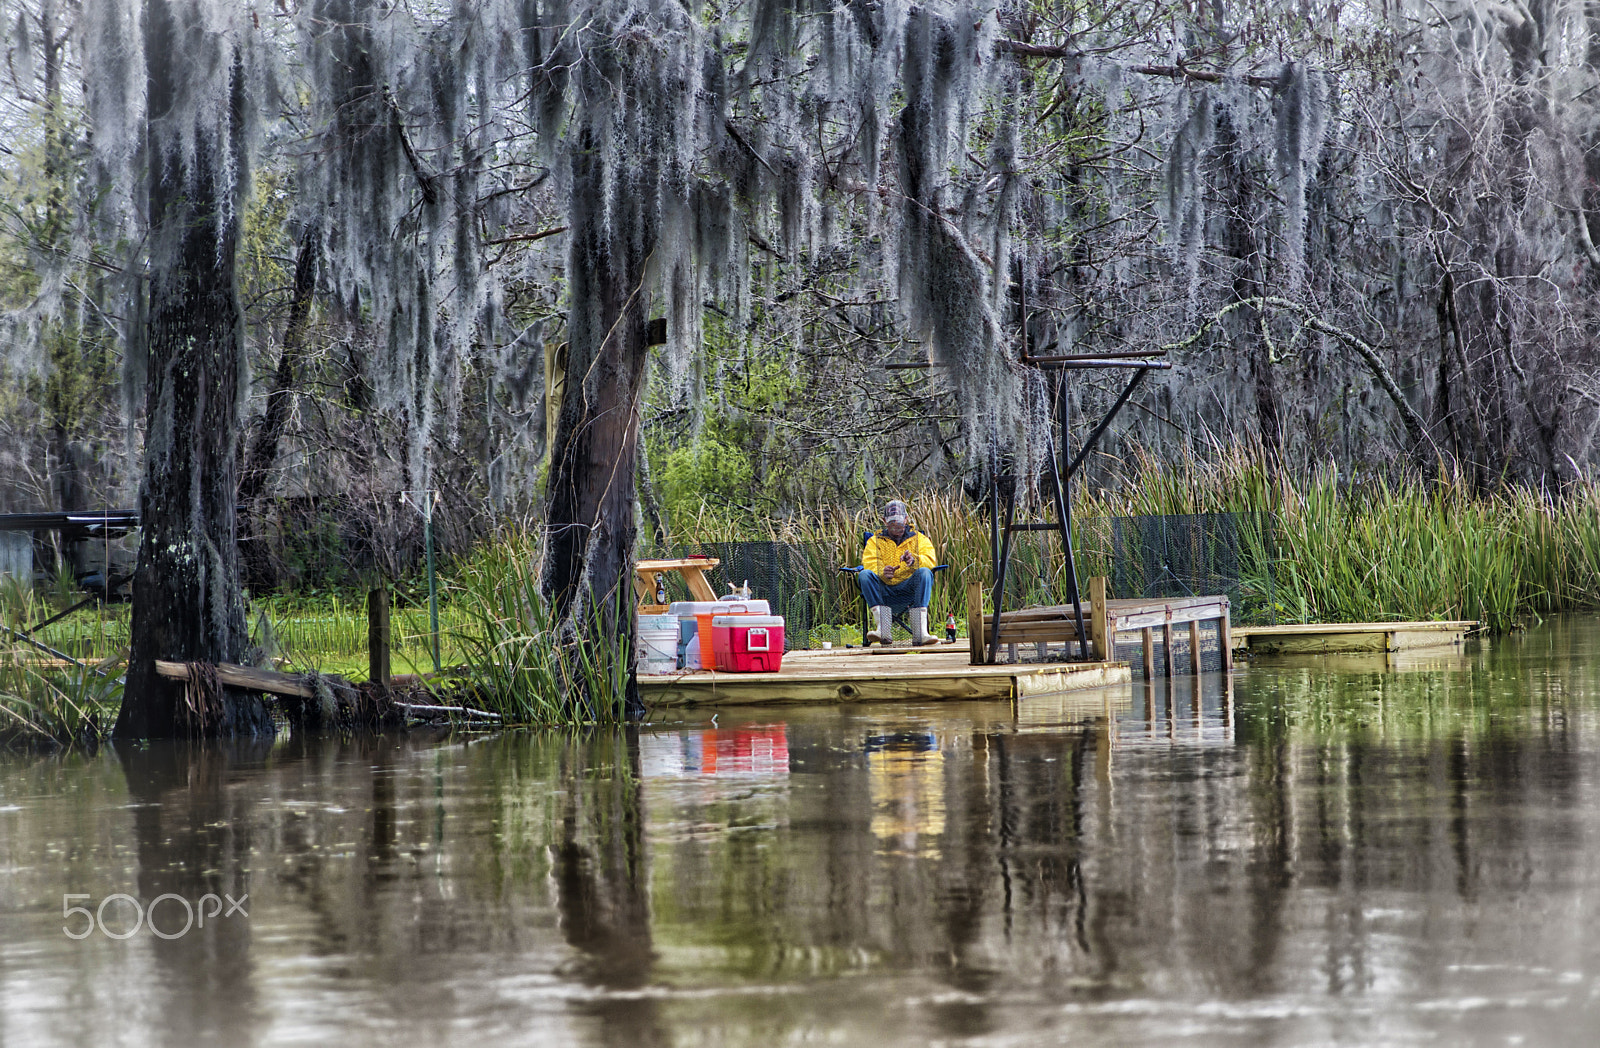 AF Zoom-Nikkor 35-105mm f/3.5-4.5D sample photo. Fishing at the louisiana bayou photography